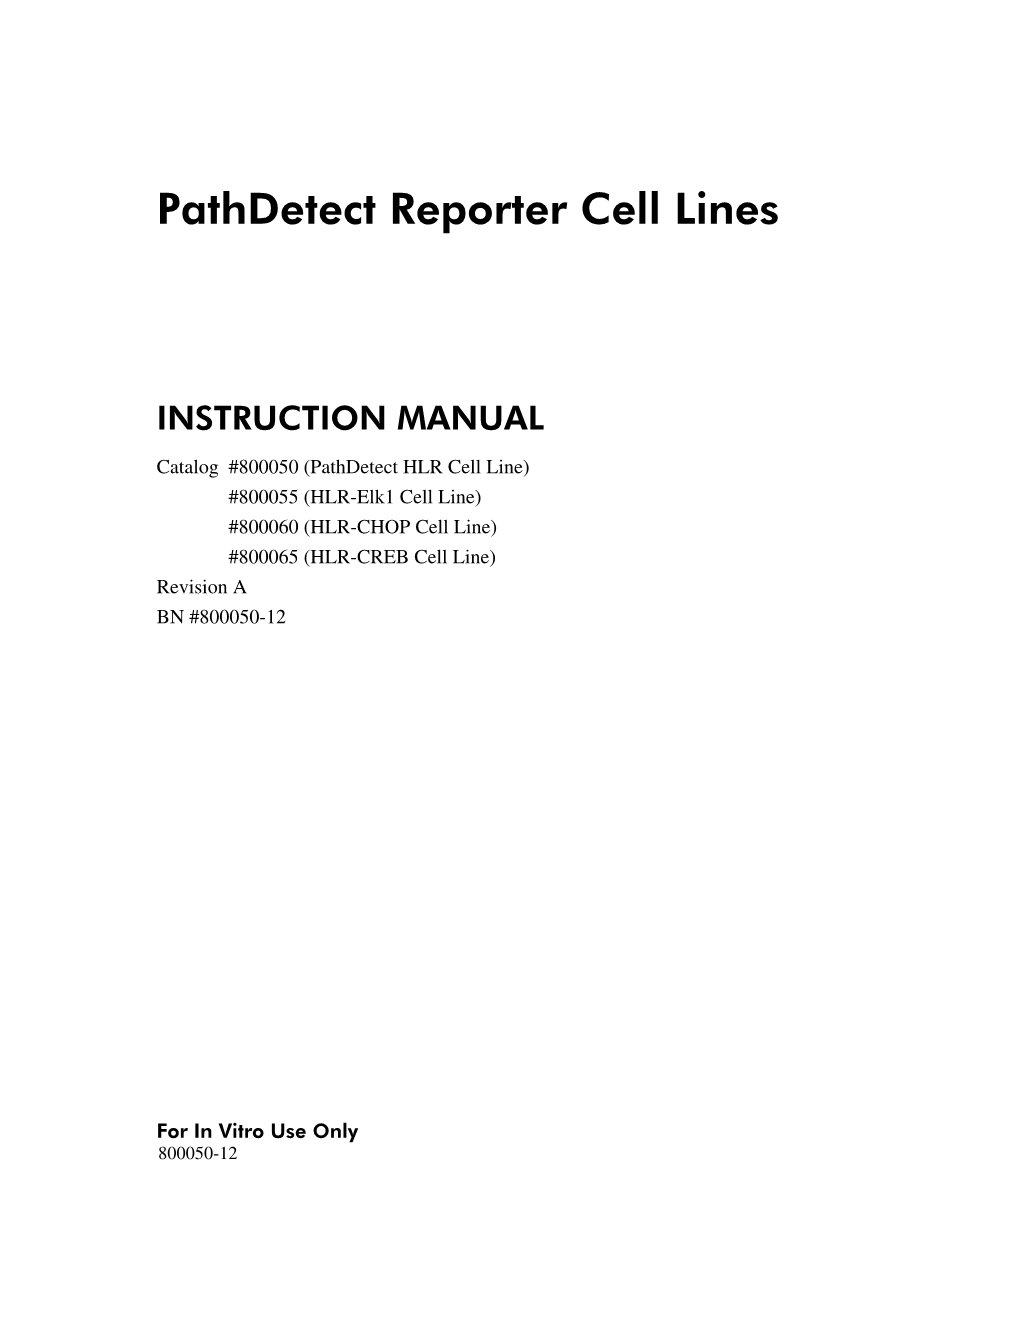 Manual: Pathdetect Reporter Cell Lines